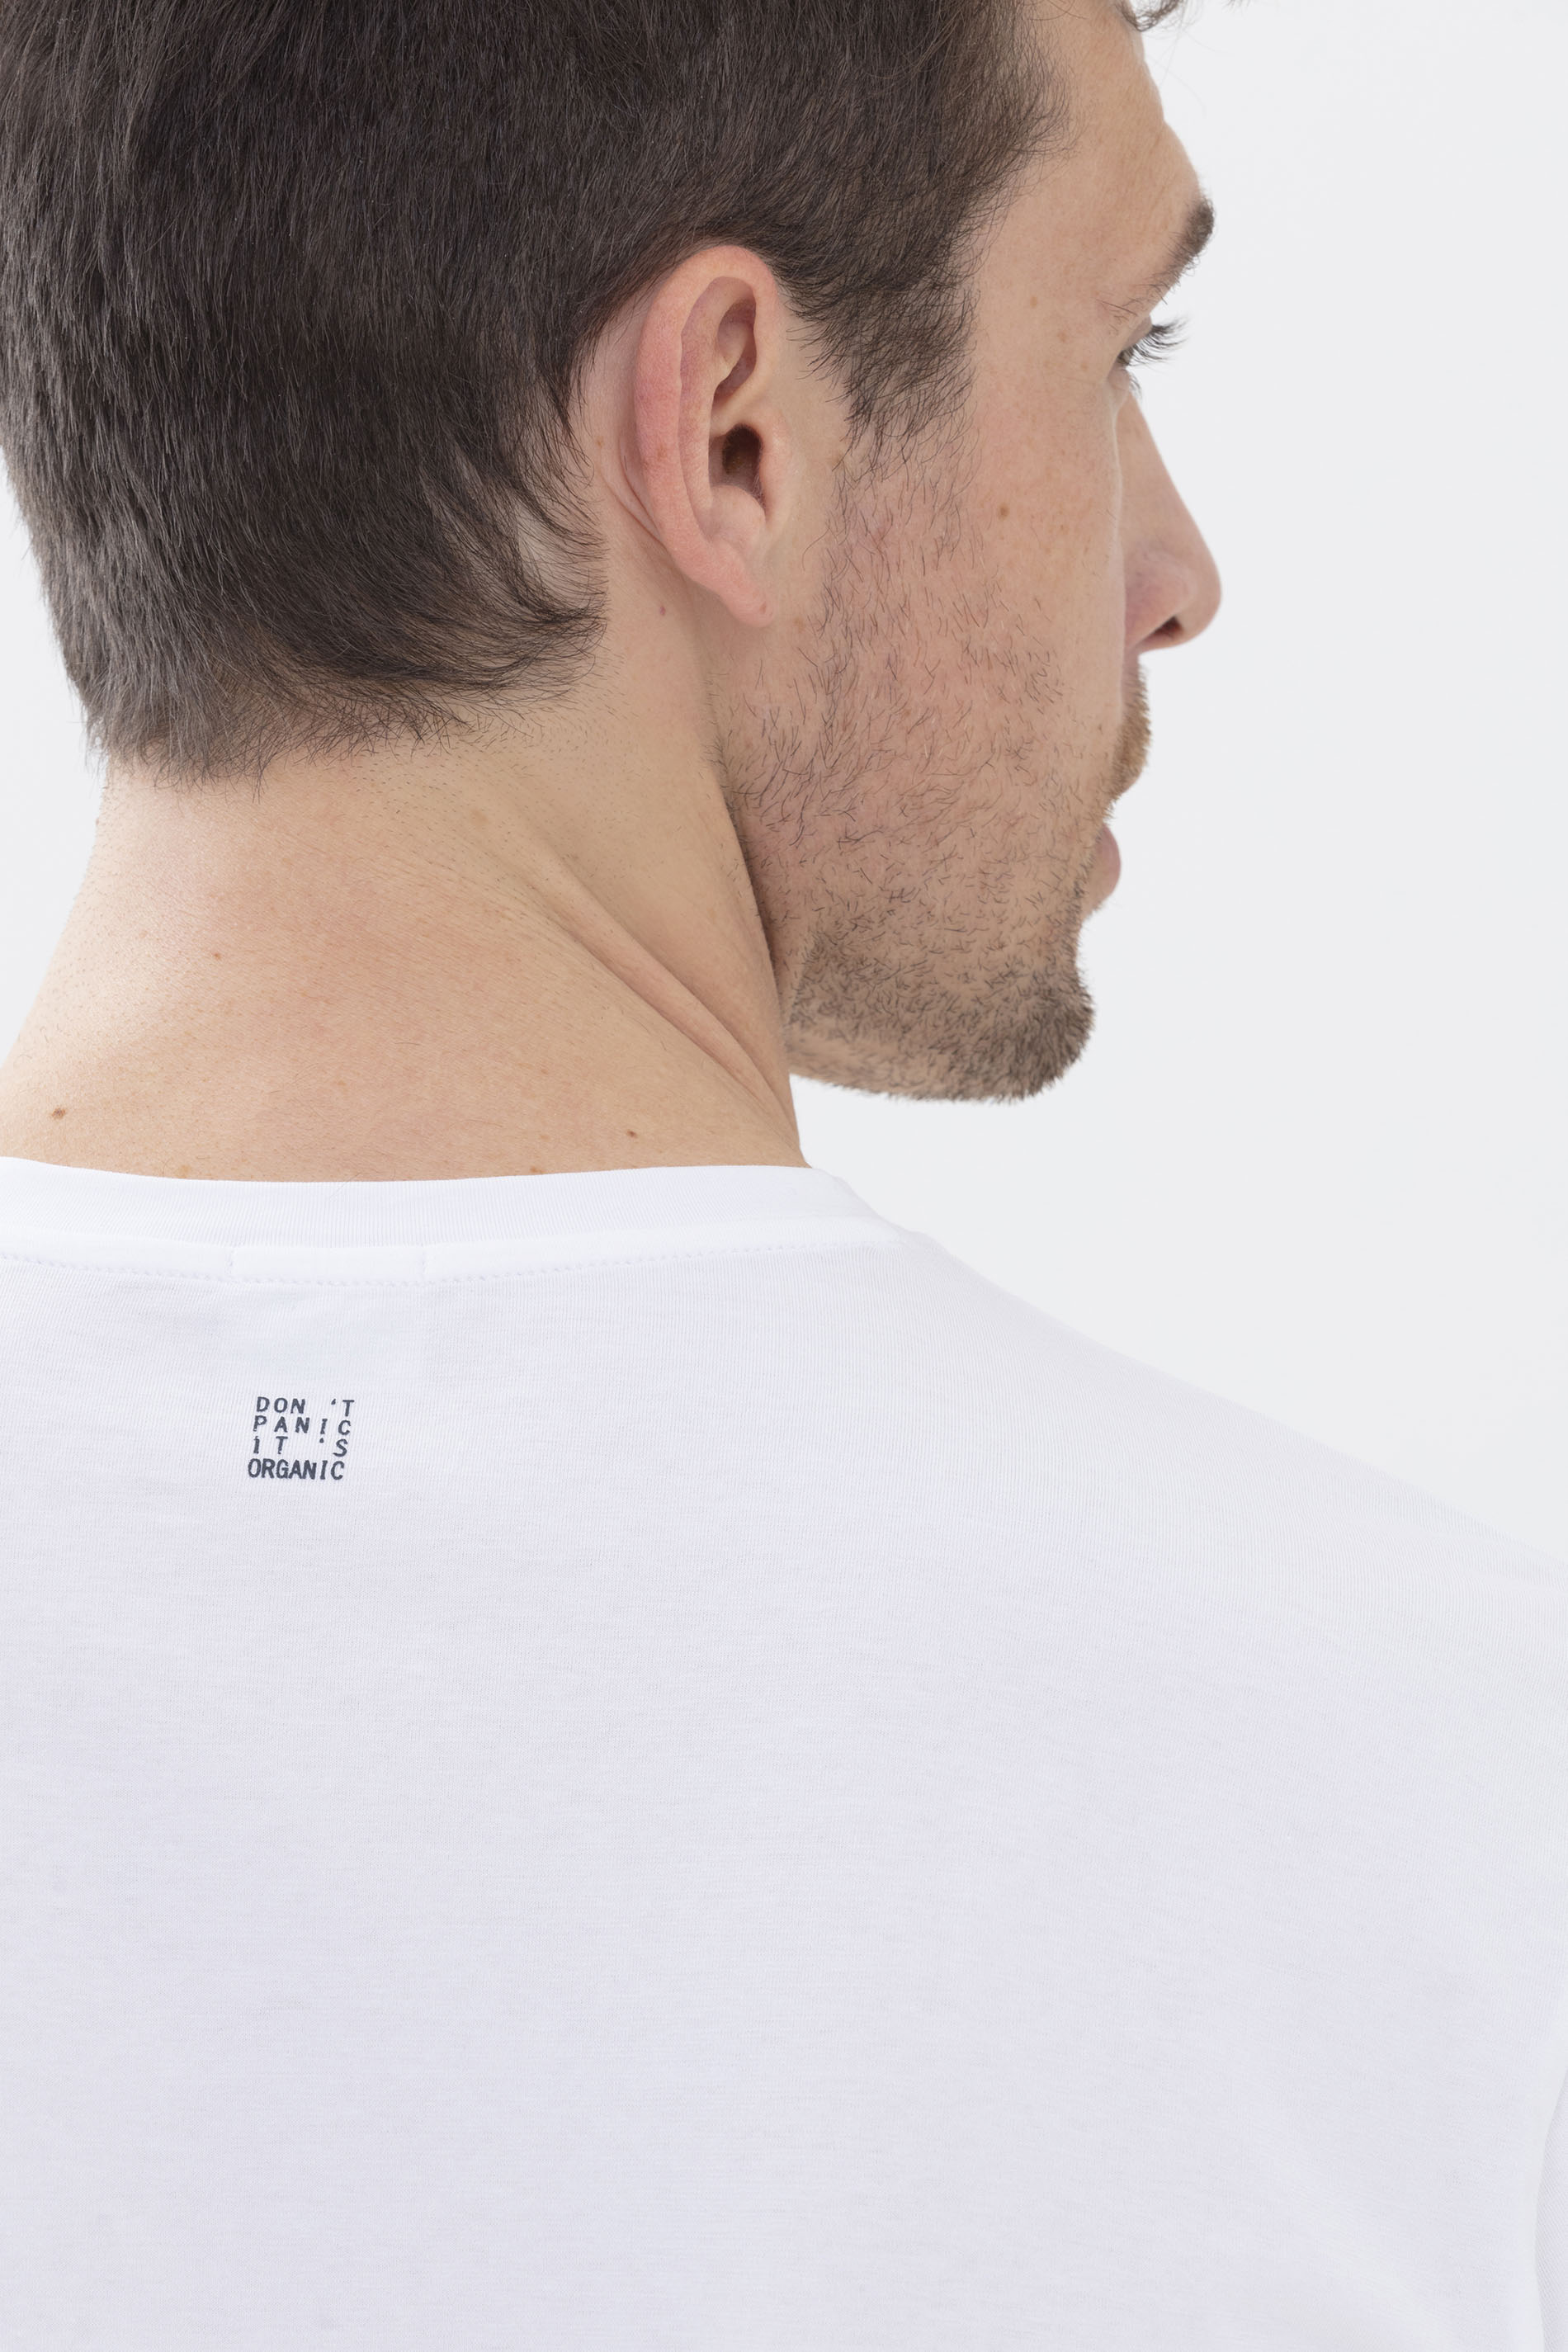 T-shirt White Serie Relax Detail View 01 | mey®